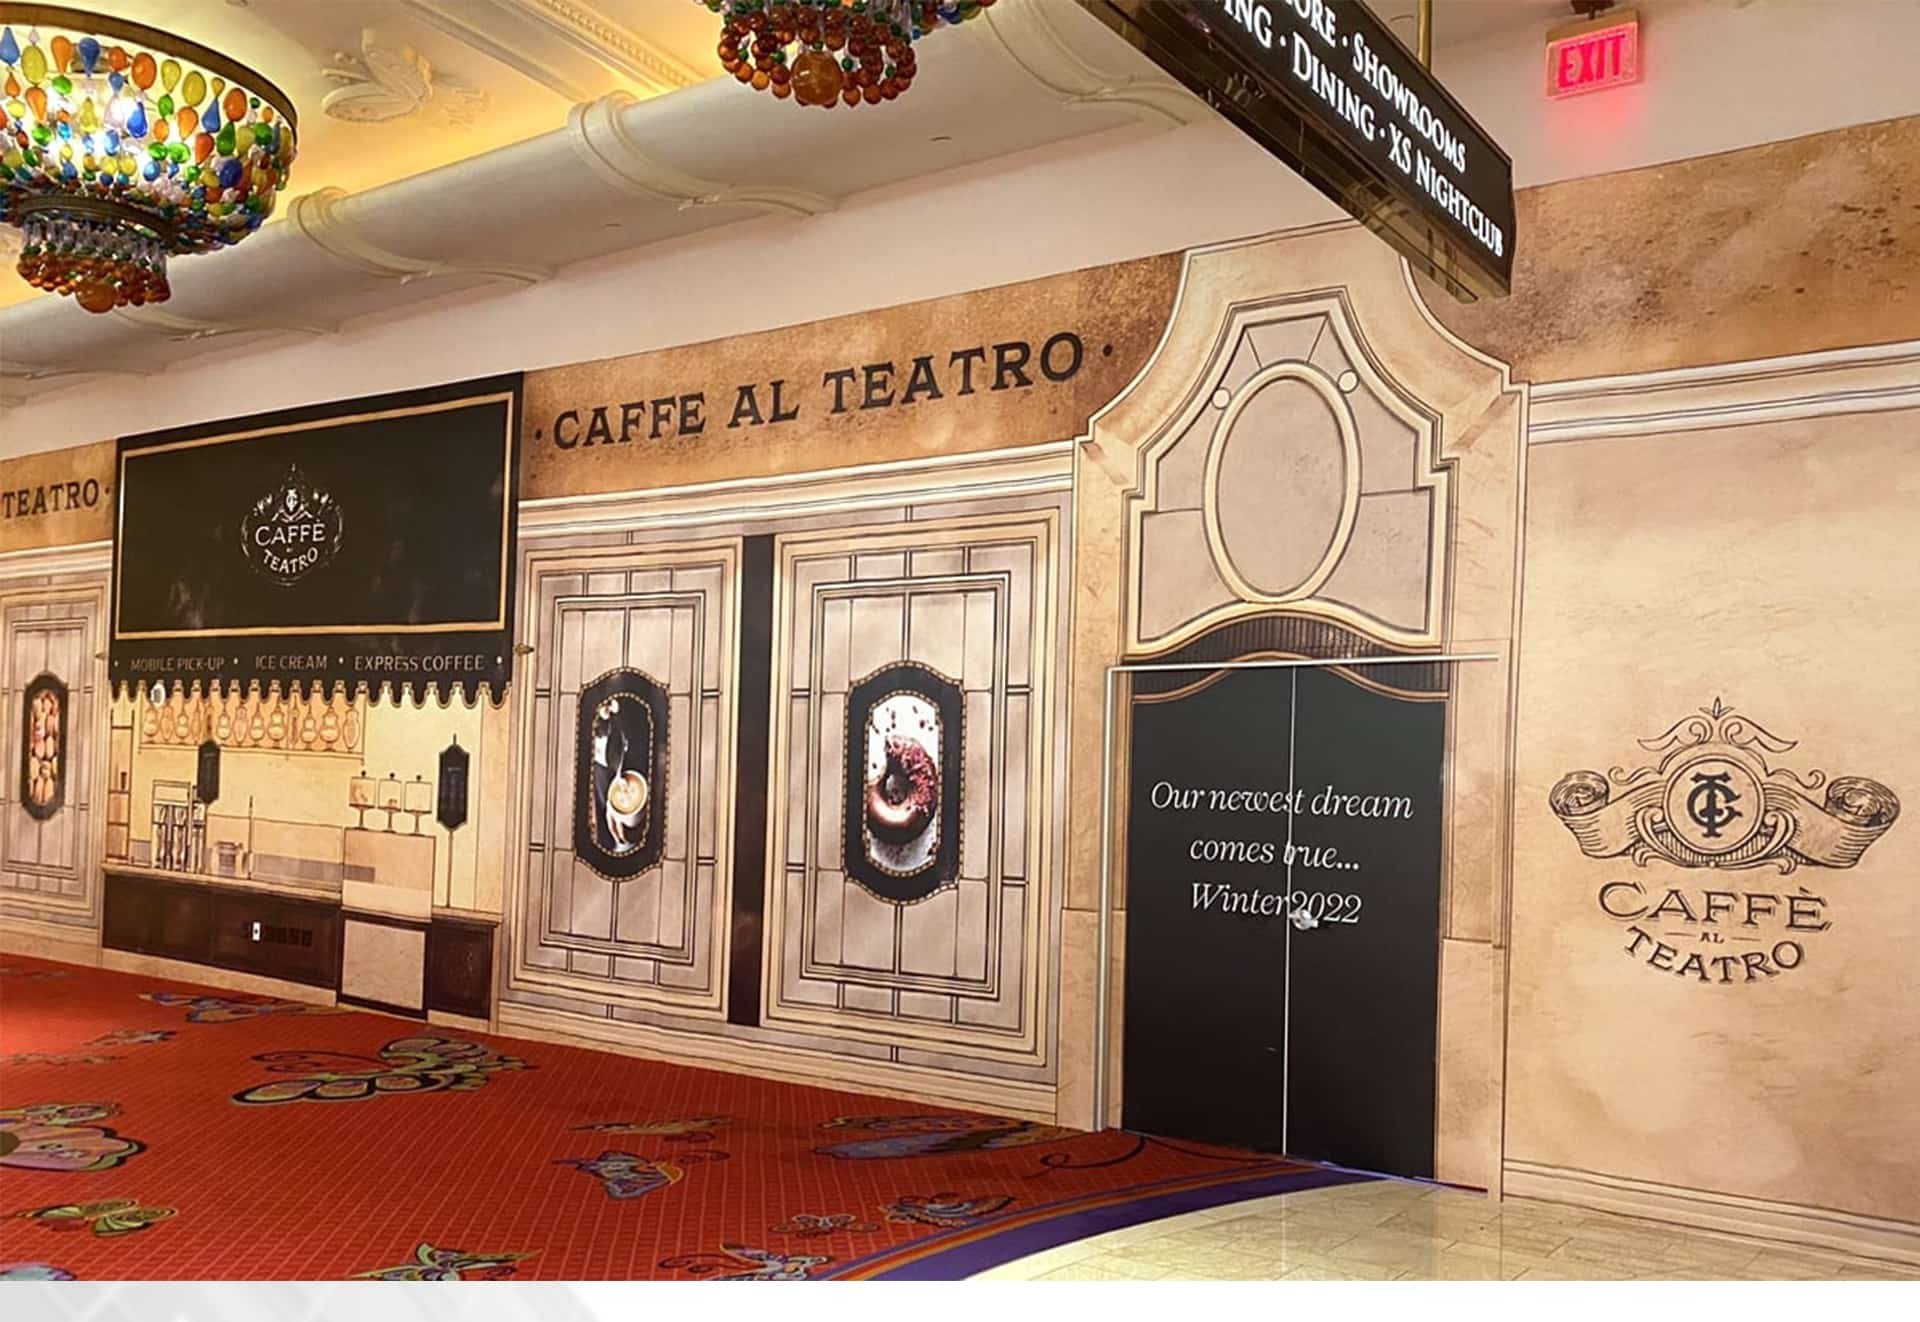 As Wynn Las Vegas nears the announcement of its new show.And the unveiling of its new theater, a nearby cafe is getting a rebrand that seems to fit the theatrical theme. The Cafe, temporarily closed, will reopen as Caffe Al Teatro in late 2022.Caffe Al Teatro in Italian, translates as “cafe at the theater.”As this popular cafe is located near both the Wynn Theater and Encore Theater. In fact, Wynn tried to combine coffee with theater when it was renovating.They collaborated with Goldtop Stone to use Turkey Golden Spider Marble to create medieval-style arches and countertops, giving visitors a sense of time travel. Tourists come to Caffe Al Teatro after watching the drama, order a cup of coffee and sit down for a while. Reminisce about the drama,Feel with the classical atmosphere,Customers can fully relax their body and mind.